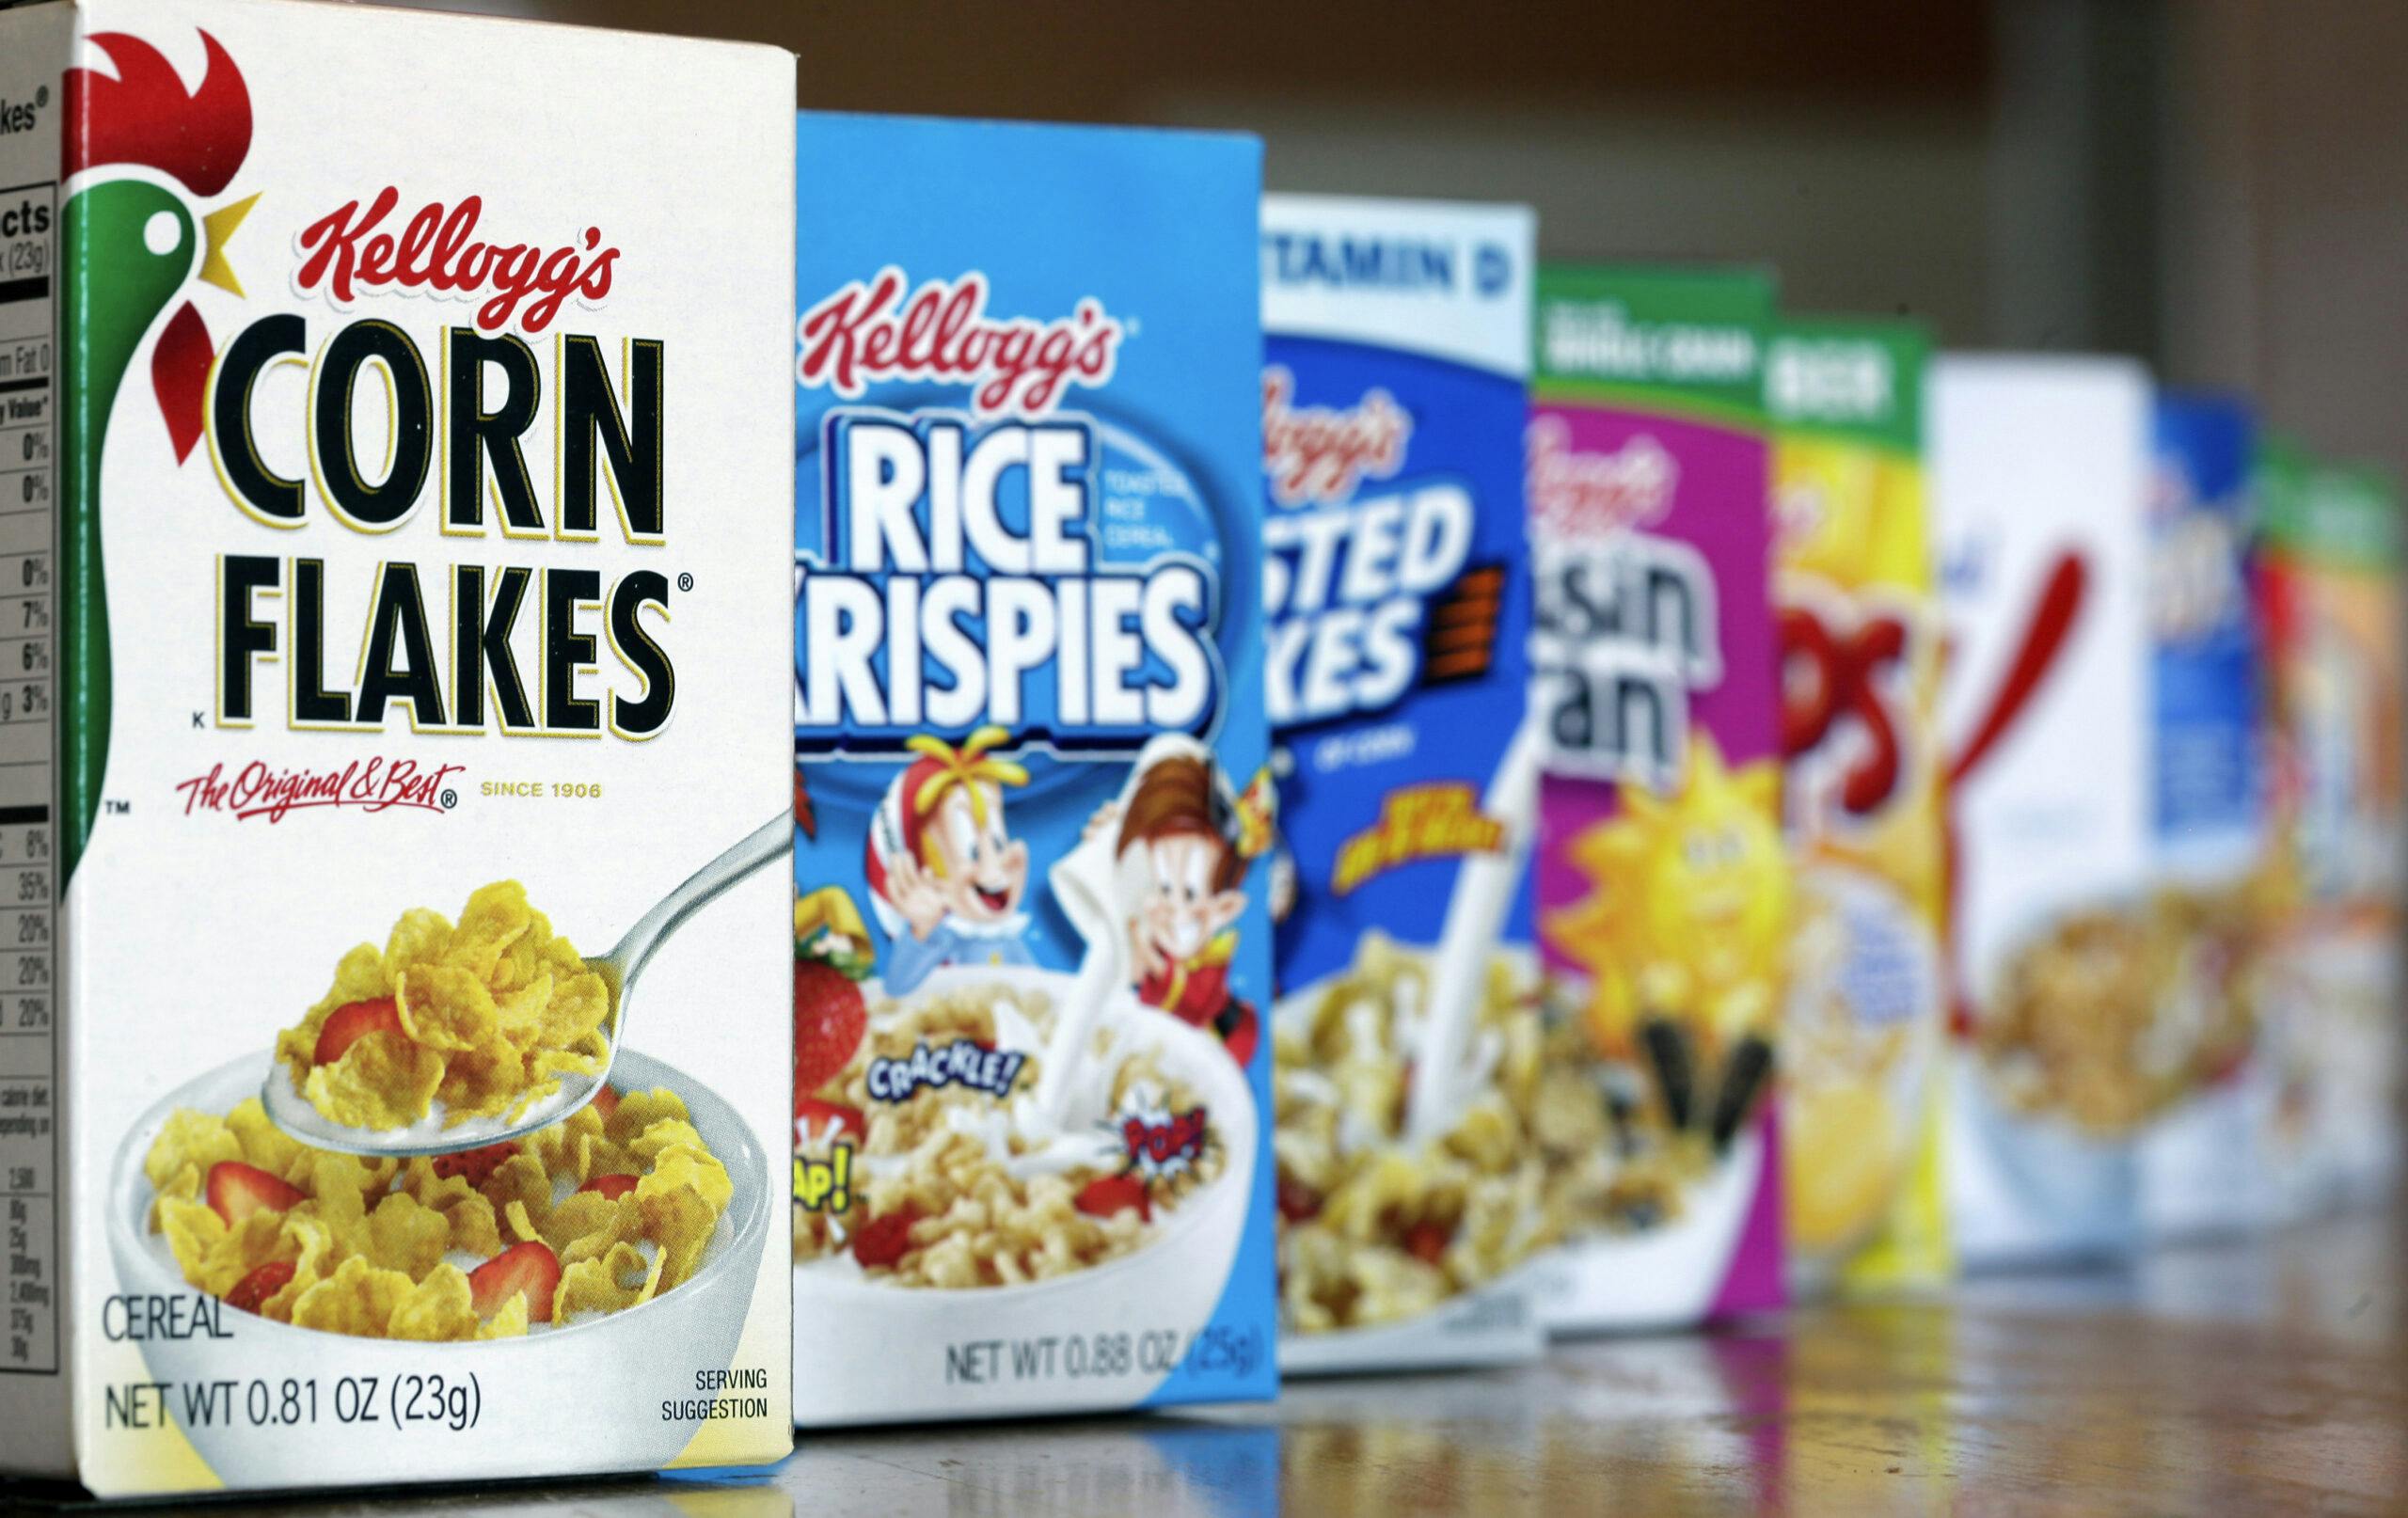 Millennials are cereal killers for Kellogg’s